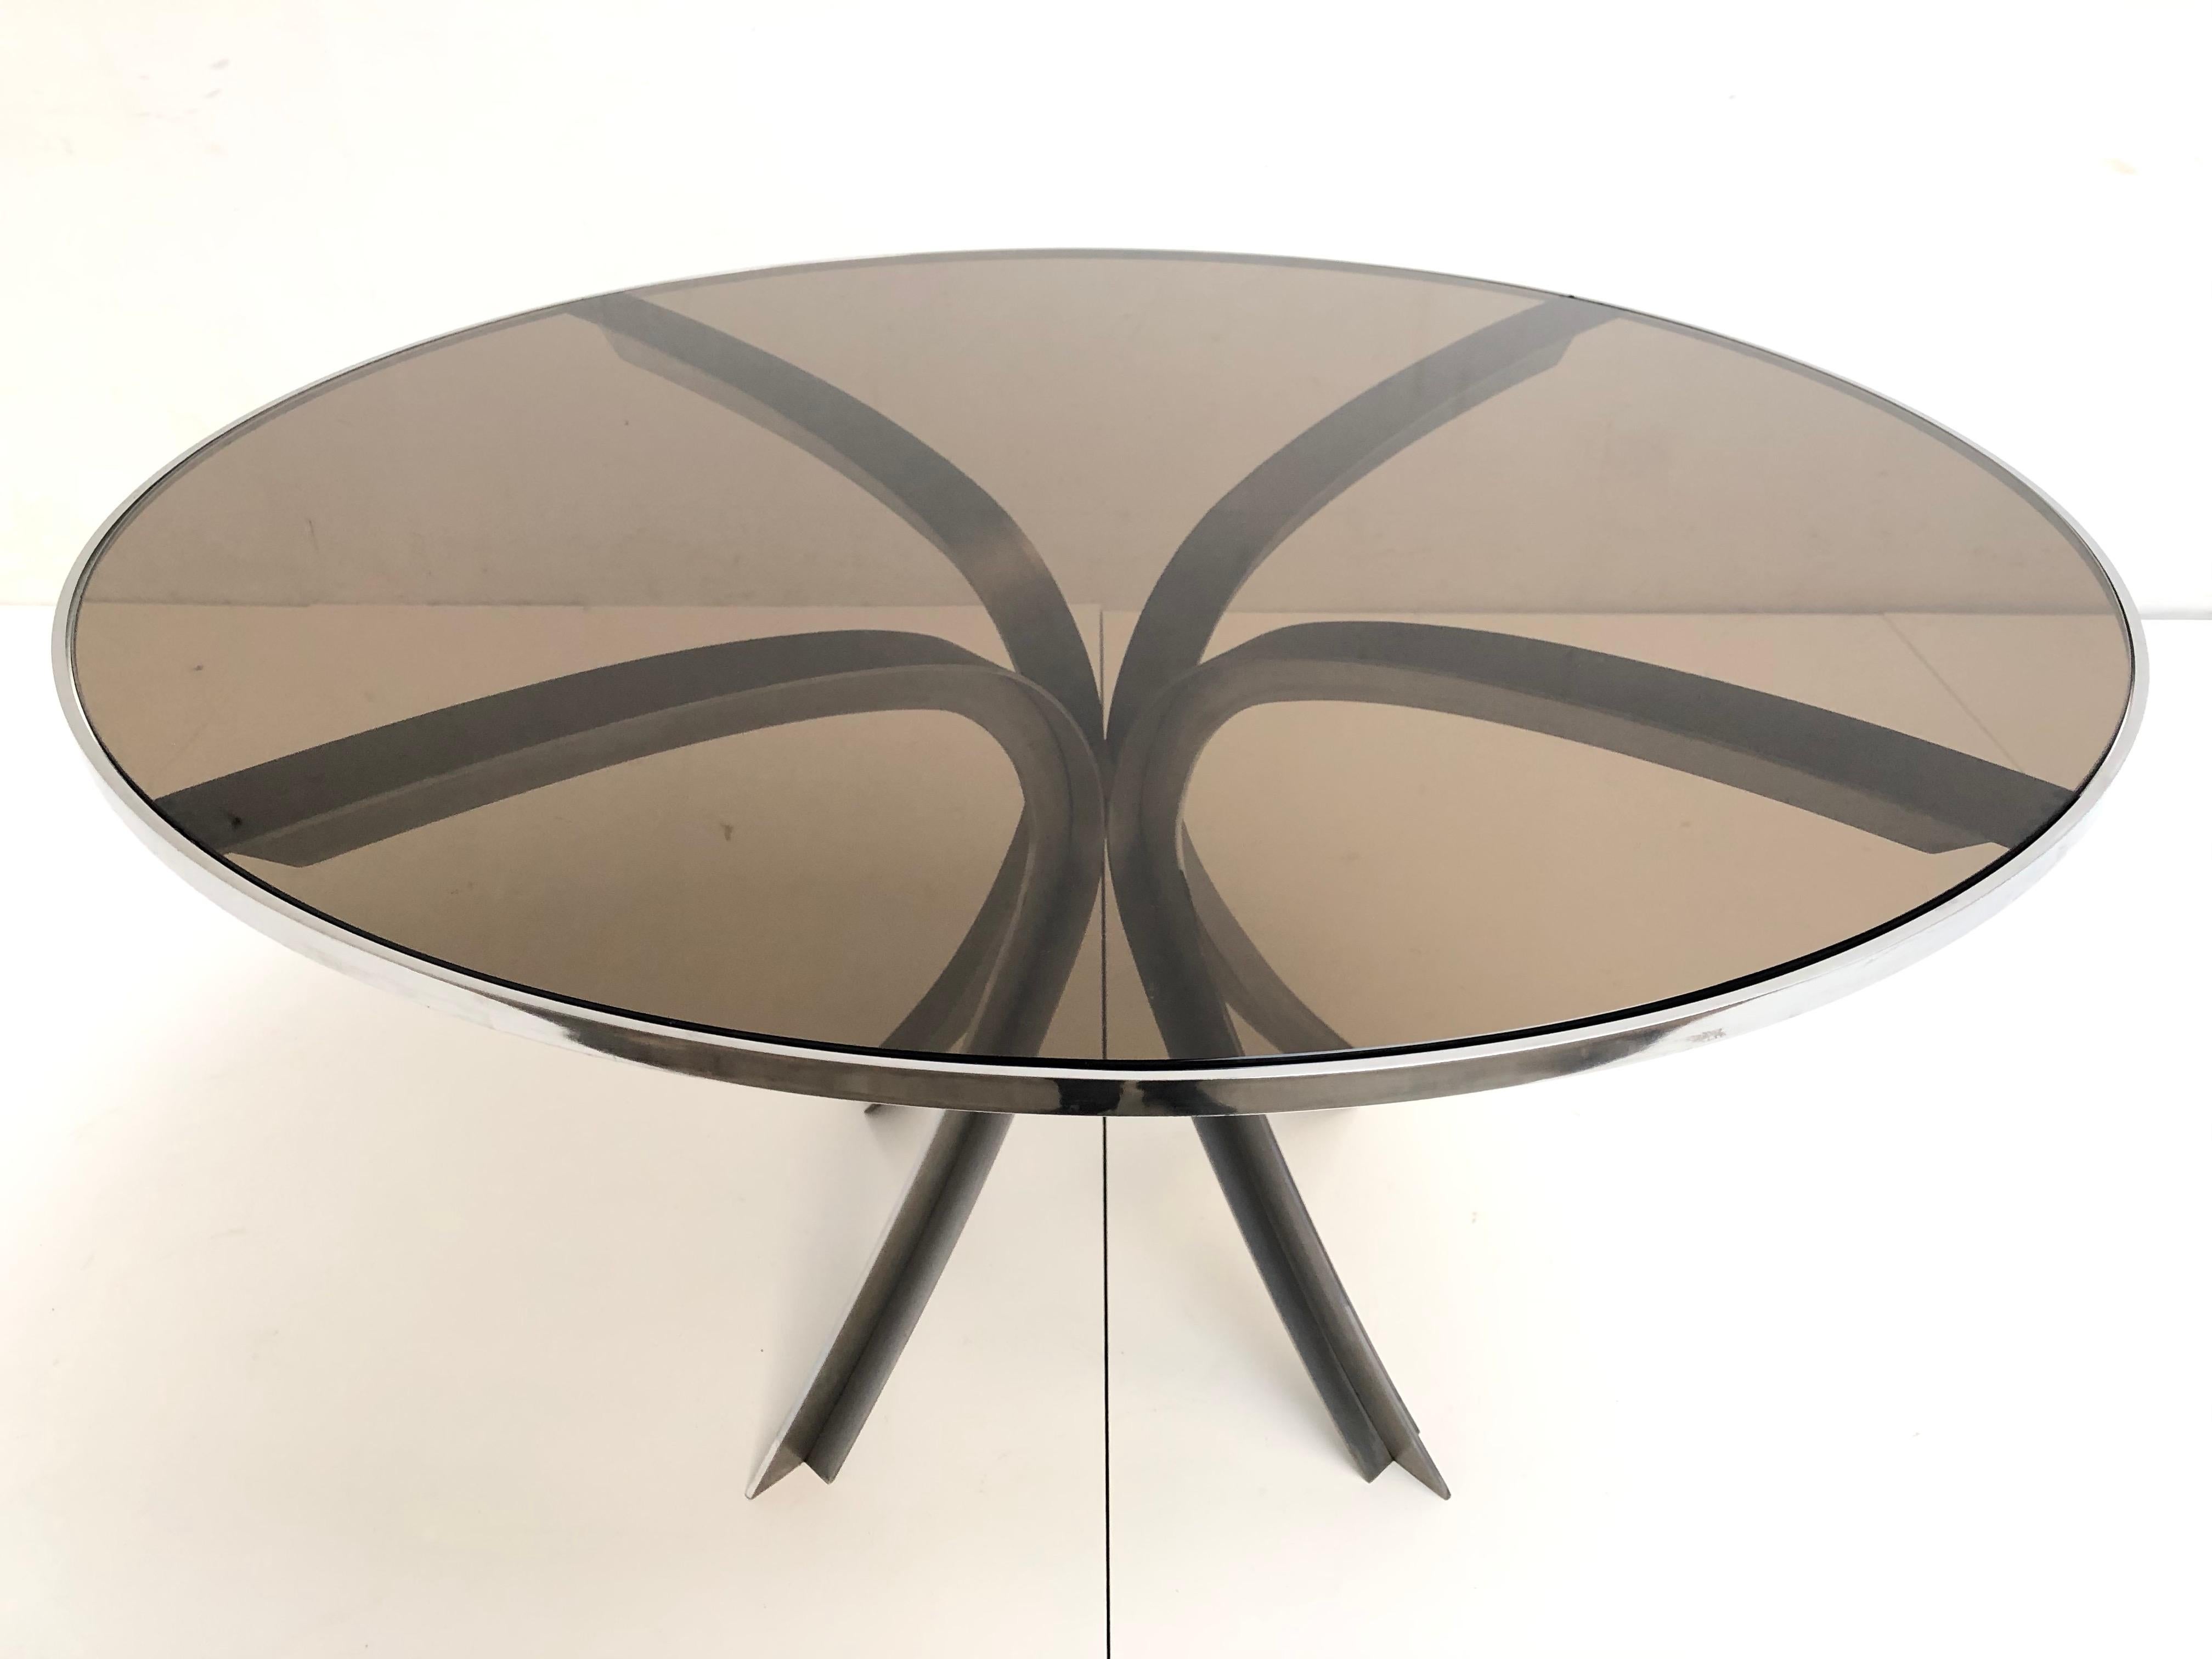 French Sculptural Stainless Steel Smoked Glass Dining Table by Xavier Féal 1970, France